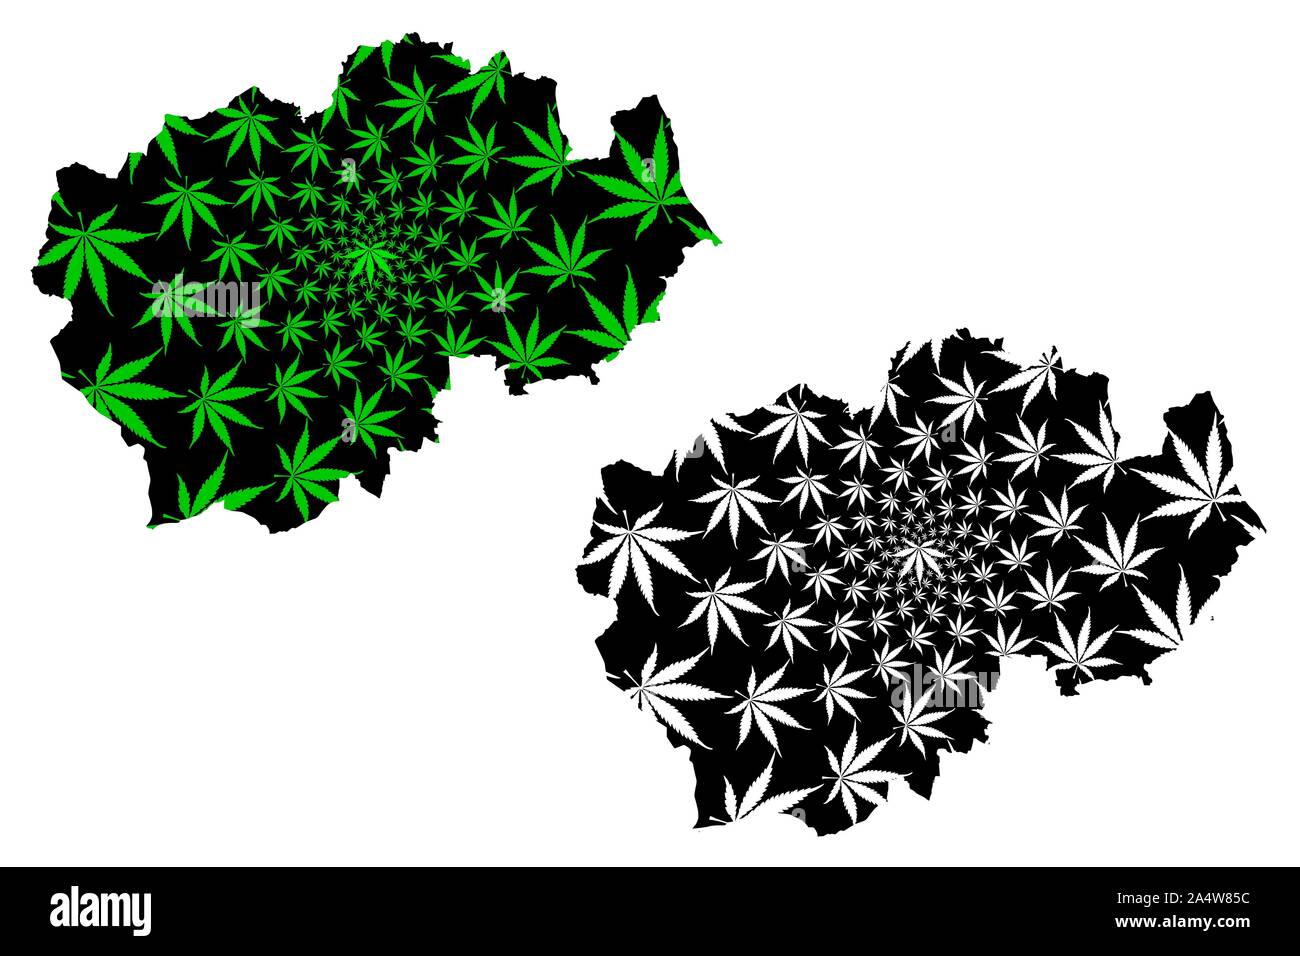 Durham (United Kingdom, England, Non-metropolitan county, shire county) map is designed cannabis leaf green and black, County Durham map made of marij Stock Vector